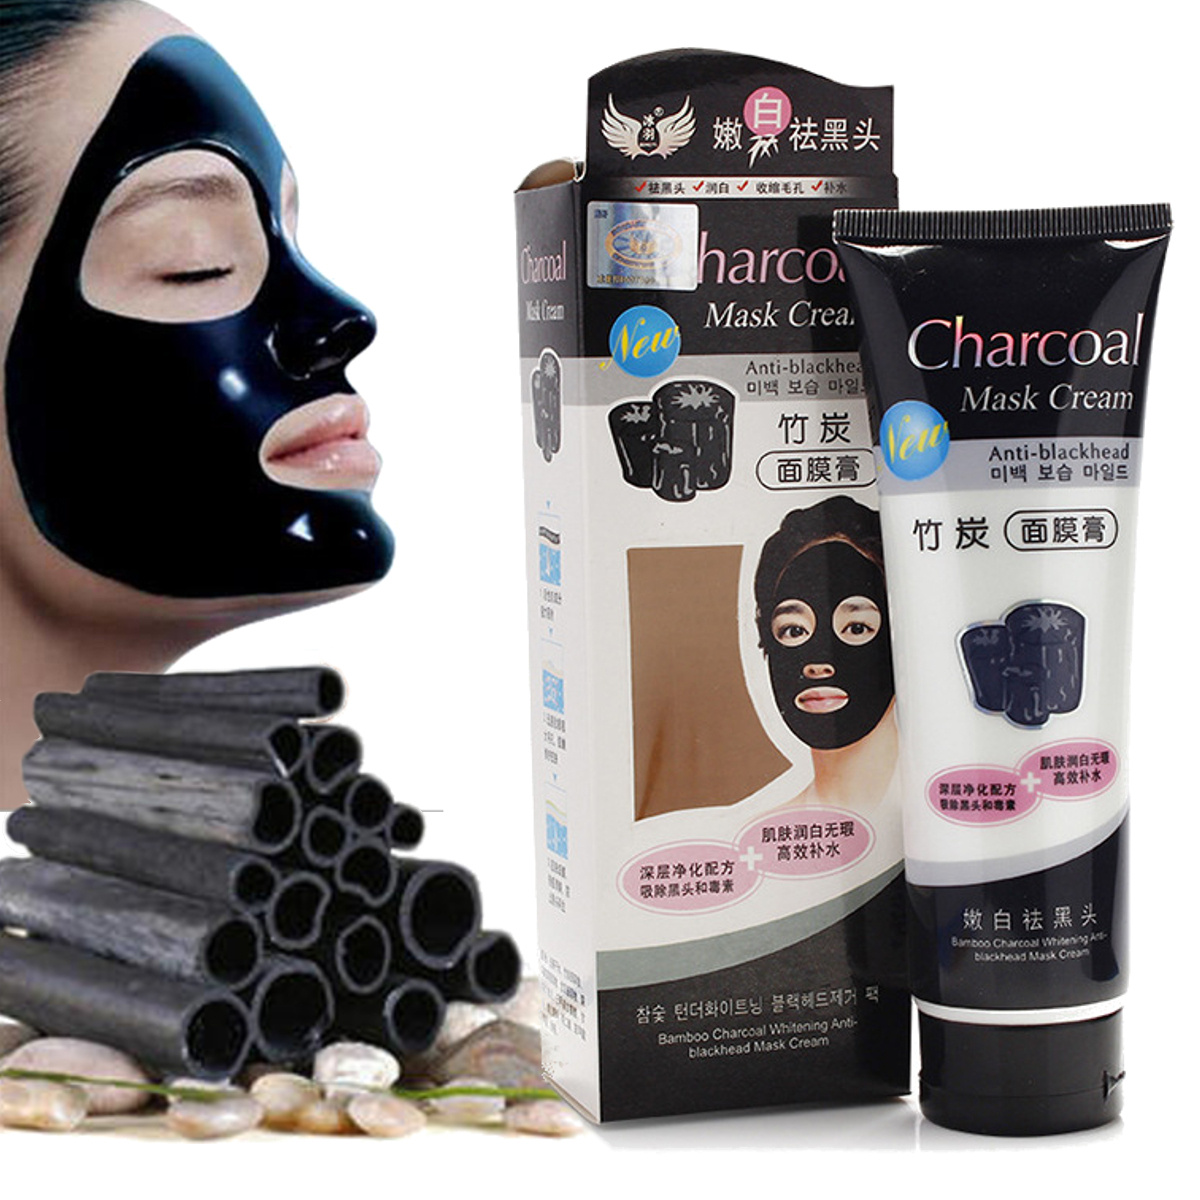 

Bamboo Charcoal Whitening Anti-Blackhead Mask Blackhead Removal Pores Cleansing Peel Off